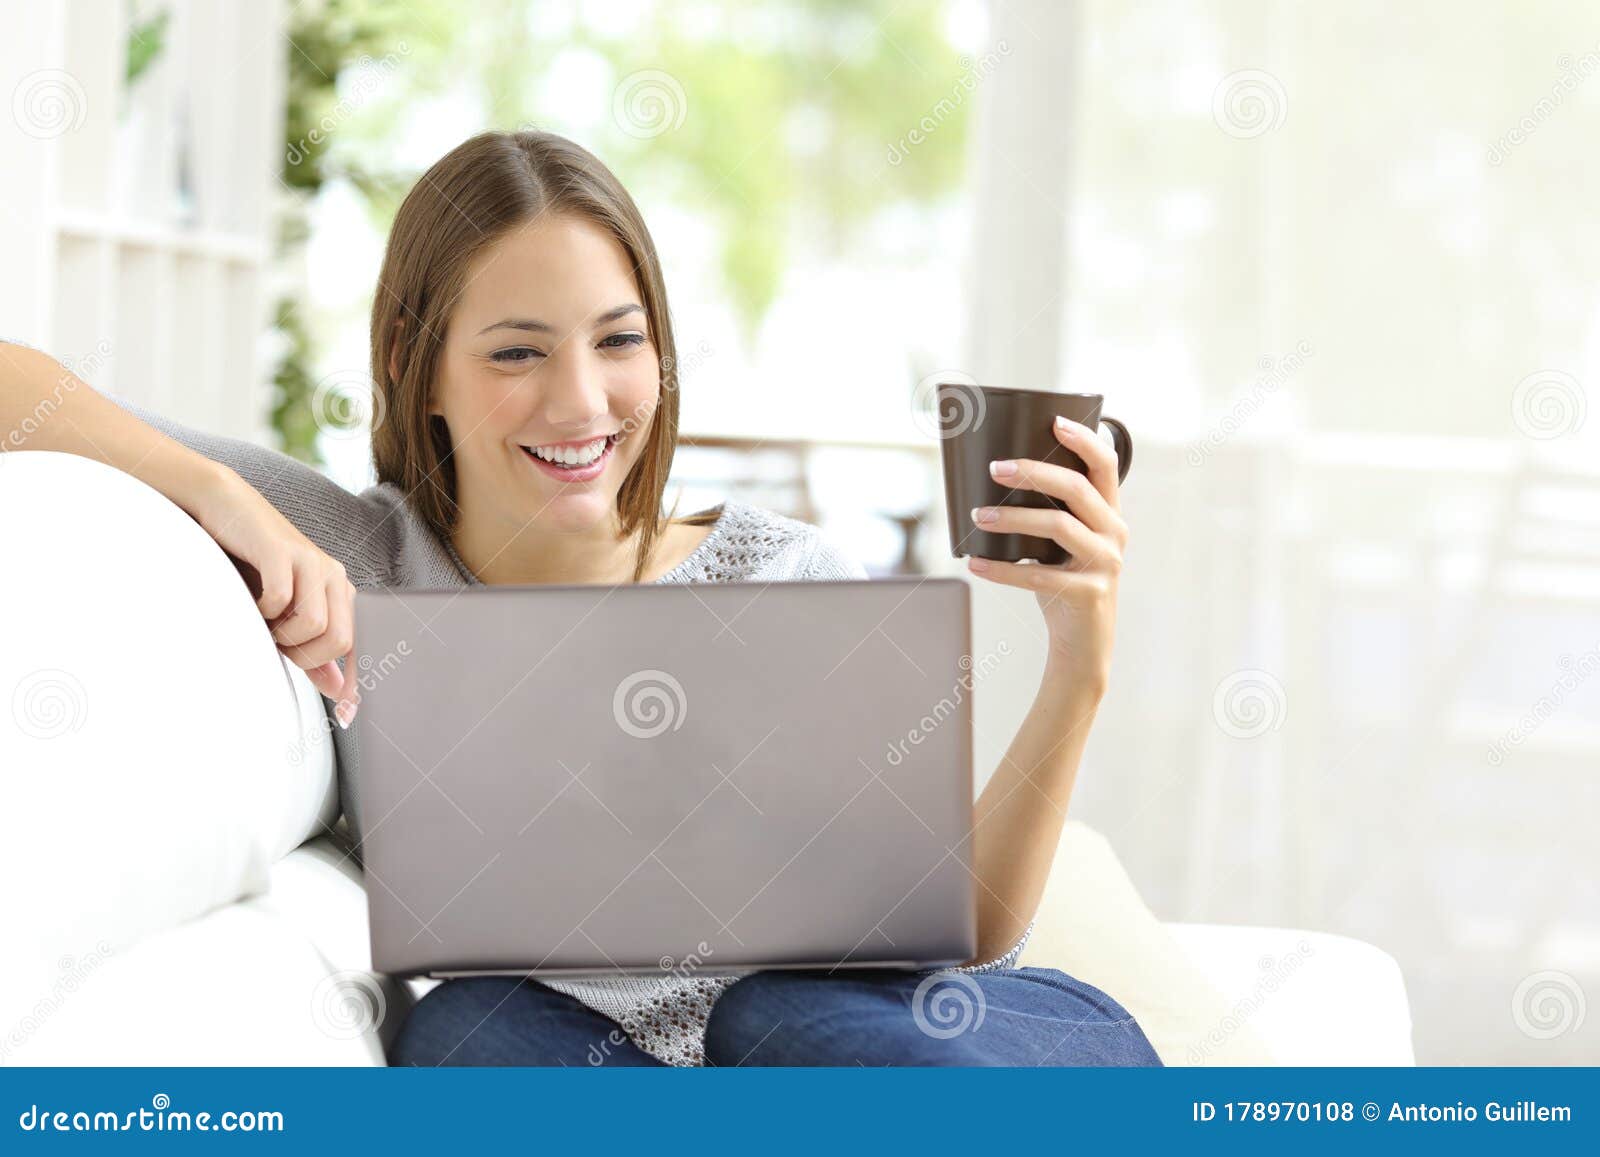 Woman Reading Content on Laptop Holding Coffee Cup Stock Photo - Image ...